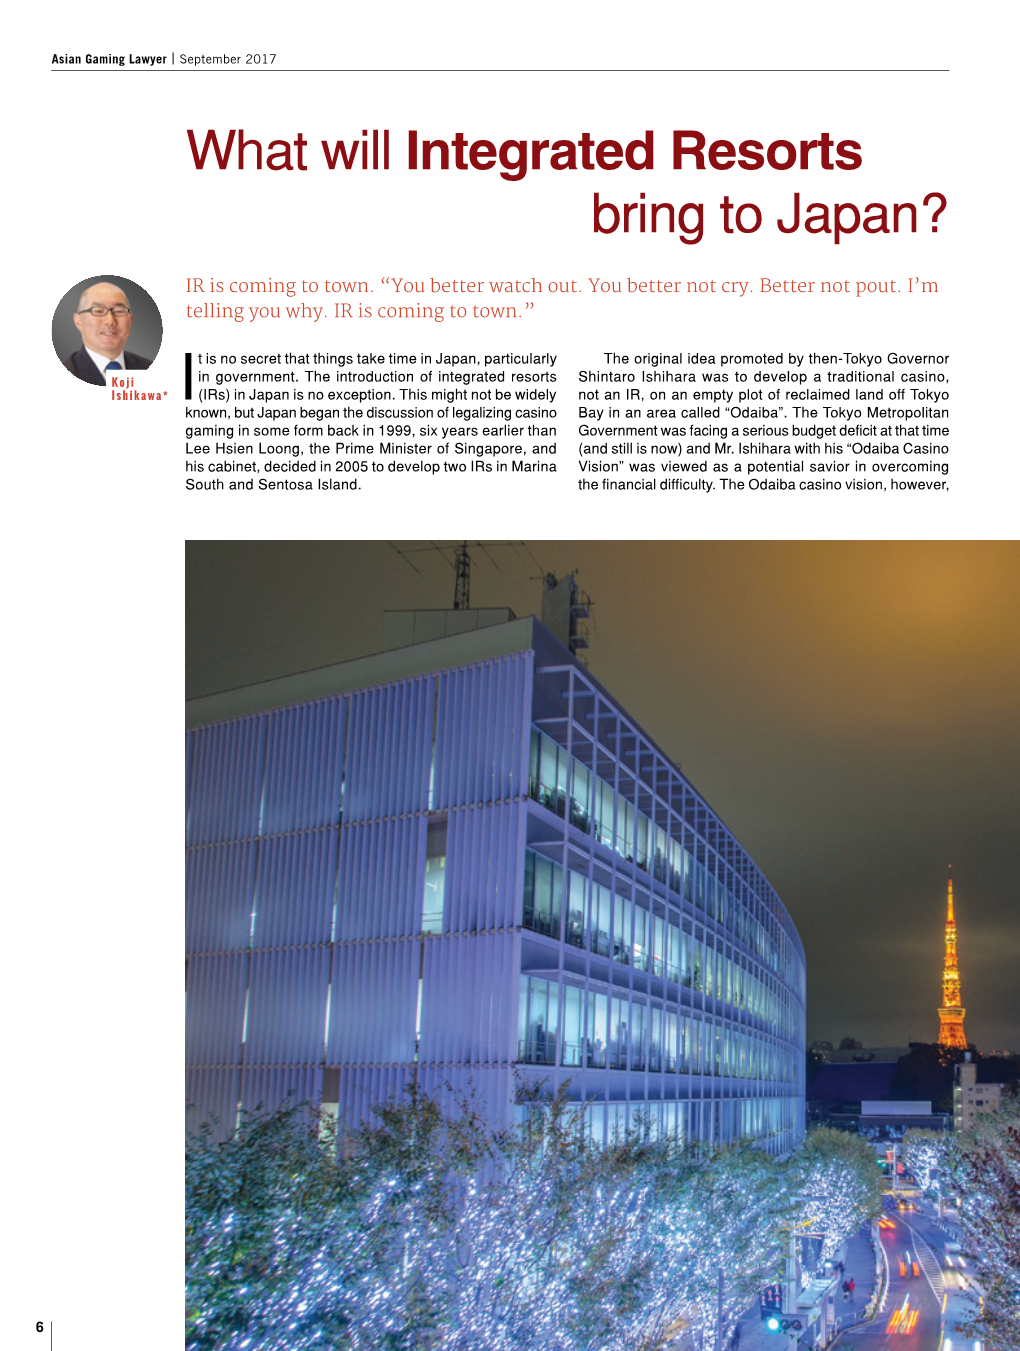 What Will Integrated Resorts Bring to Japan?